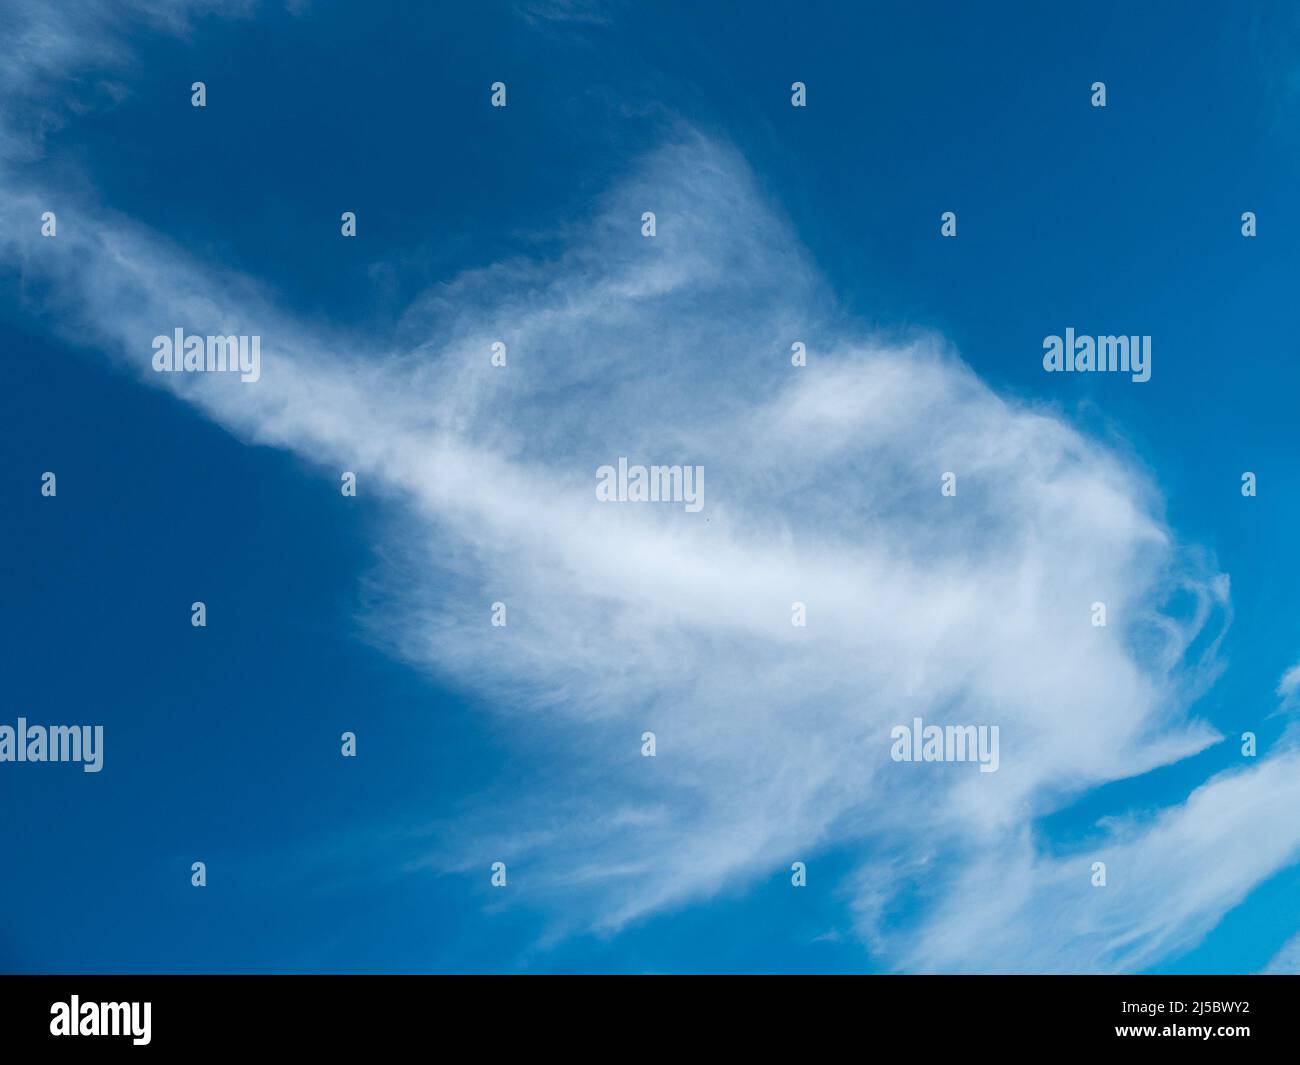 Abstract cloud shape of a fish or sea cat on the blue sky Stock Photo